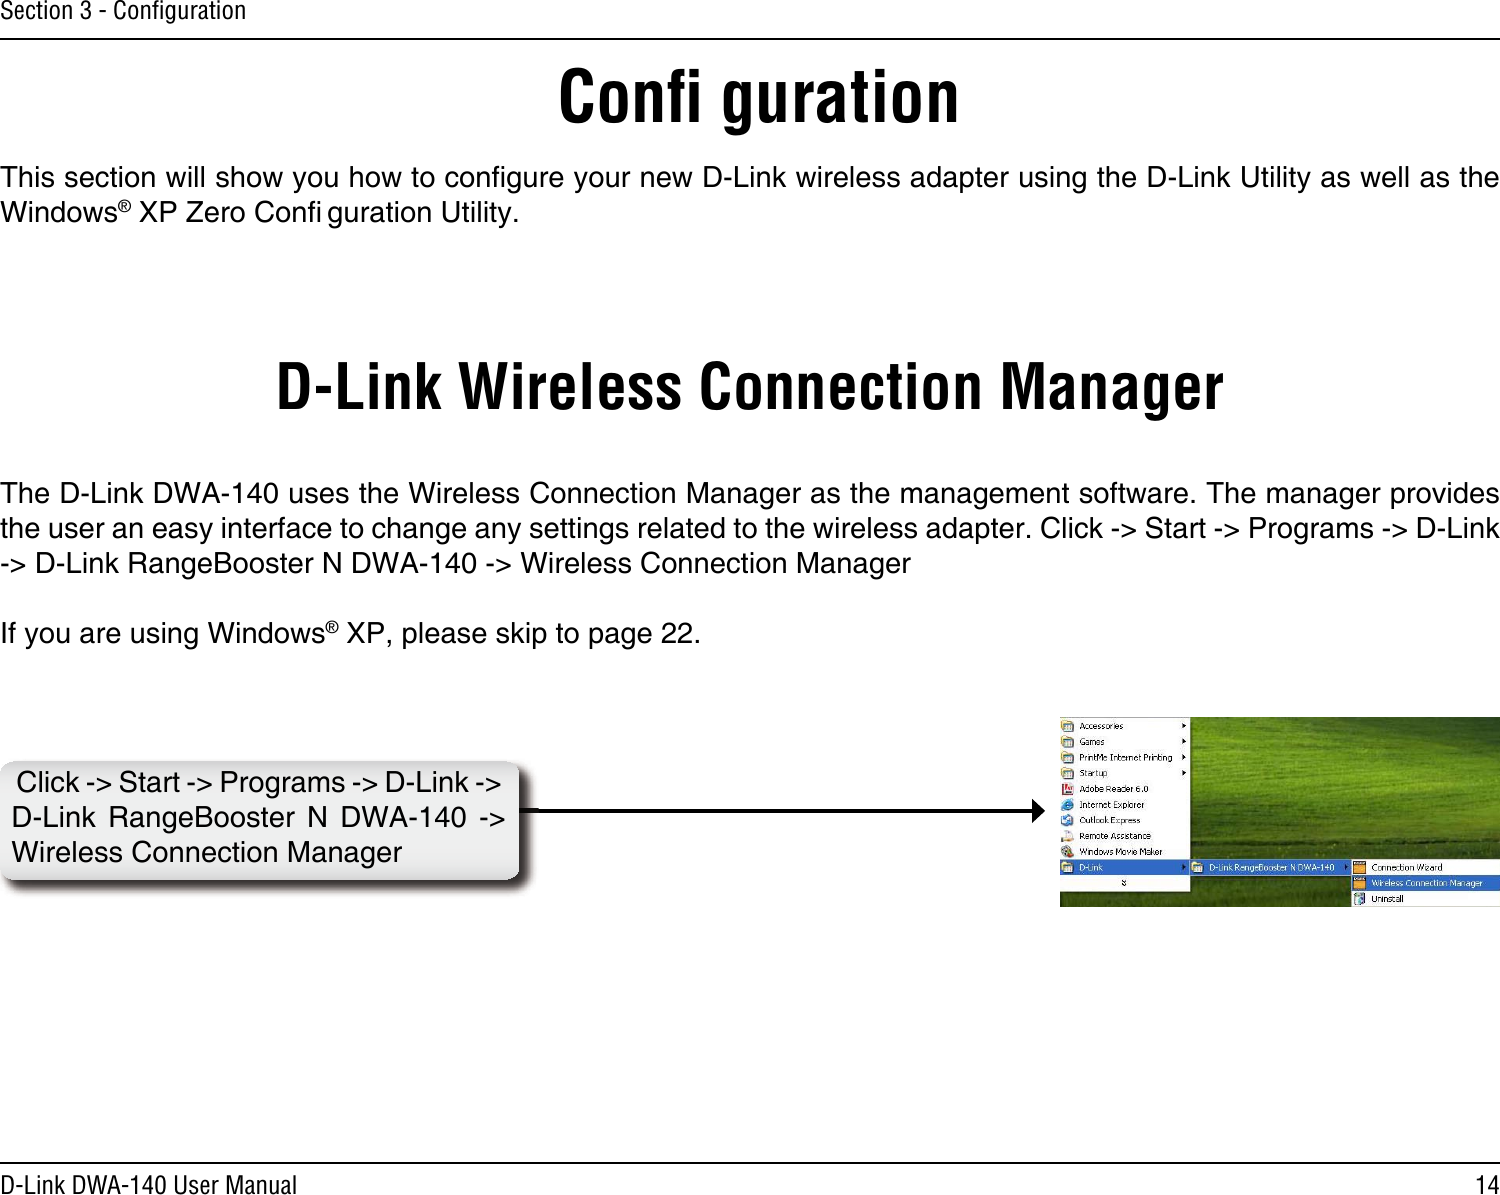 14D-Link DWA-140 User ManualSection 3 - ConﬁgurationConﬁ gurationThis section will show you how to conﬁgure your new D-Link wireless adapter using the D-Link Utility as well as the Windows® XP Zero Conﬁ guration Utility.D-Link Wireless Connection ManagerThe D-Link DWA-140 uses the Wireless Connection Manager as the management software. The manager provides the user an easy interface to change any settings related to the wireless adapter. Click -&gt; Start -&gt; Programs -&gt; D-Link -&gt; D-Link RangeBooster N DWA-140 -&gt; Wireless Connection ManagerIf you are using Windows® XP, please skip to page 22.Click -&gt; Start -&gt; Programs -&gt; D-Link -&gt; D-Link  RangeBooster  N  DWA-140  -&gt; Wireless Connection Manager